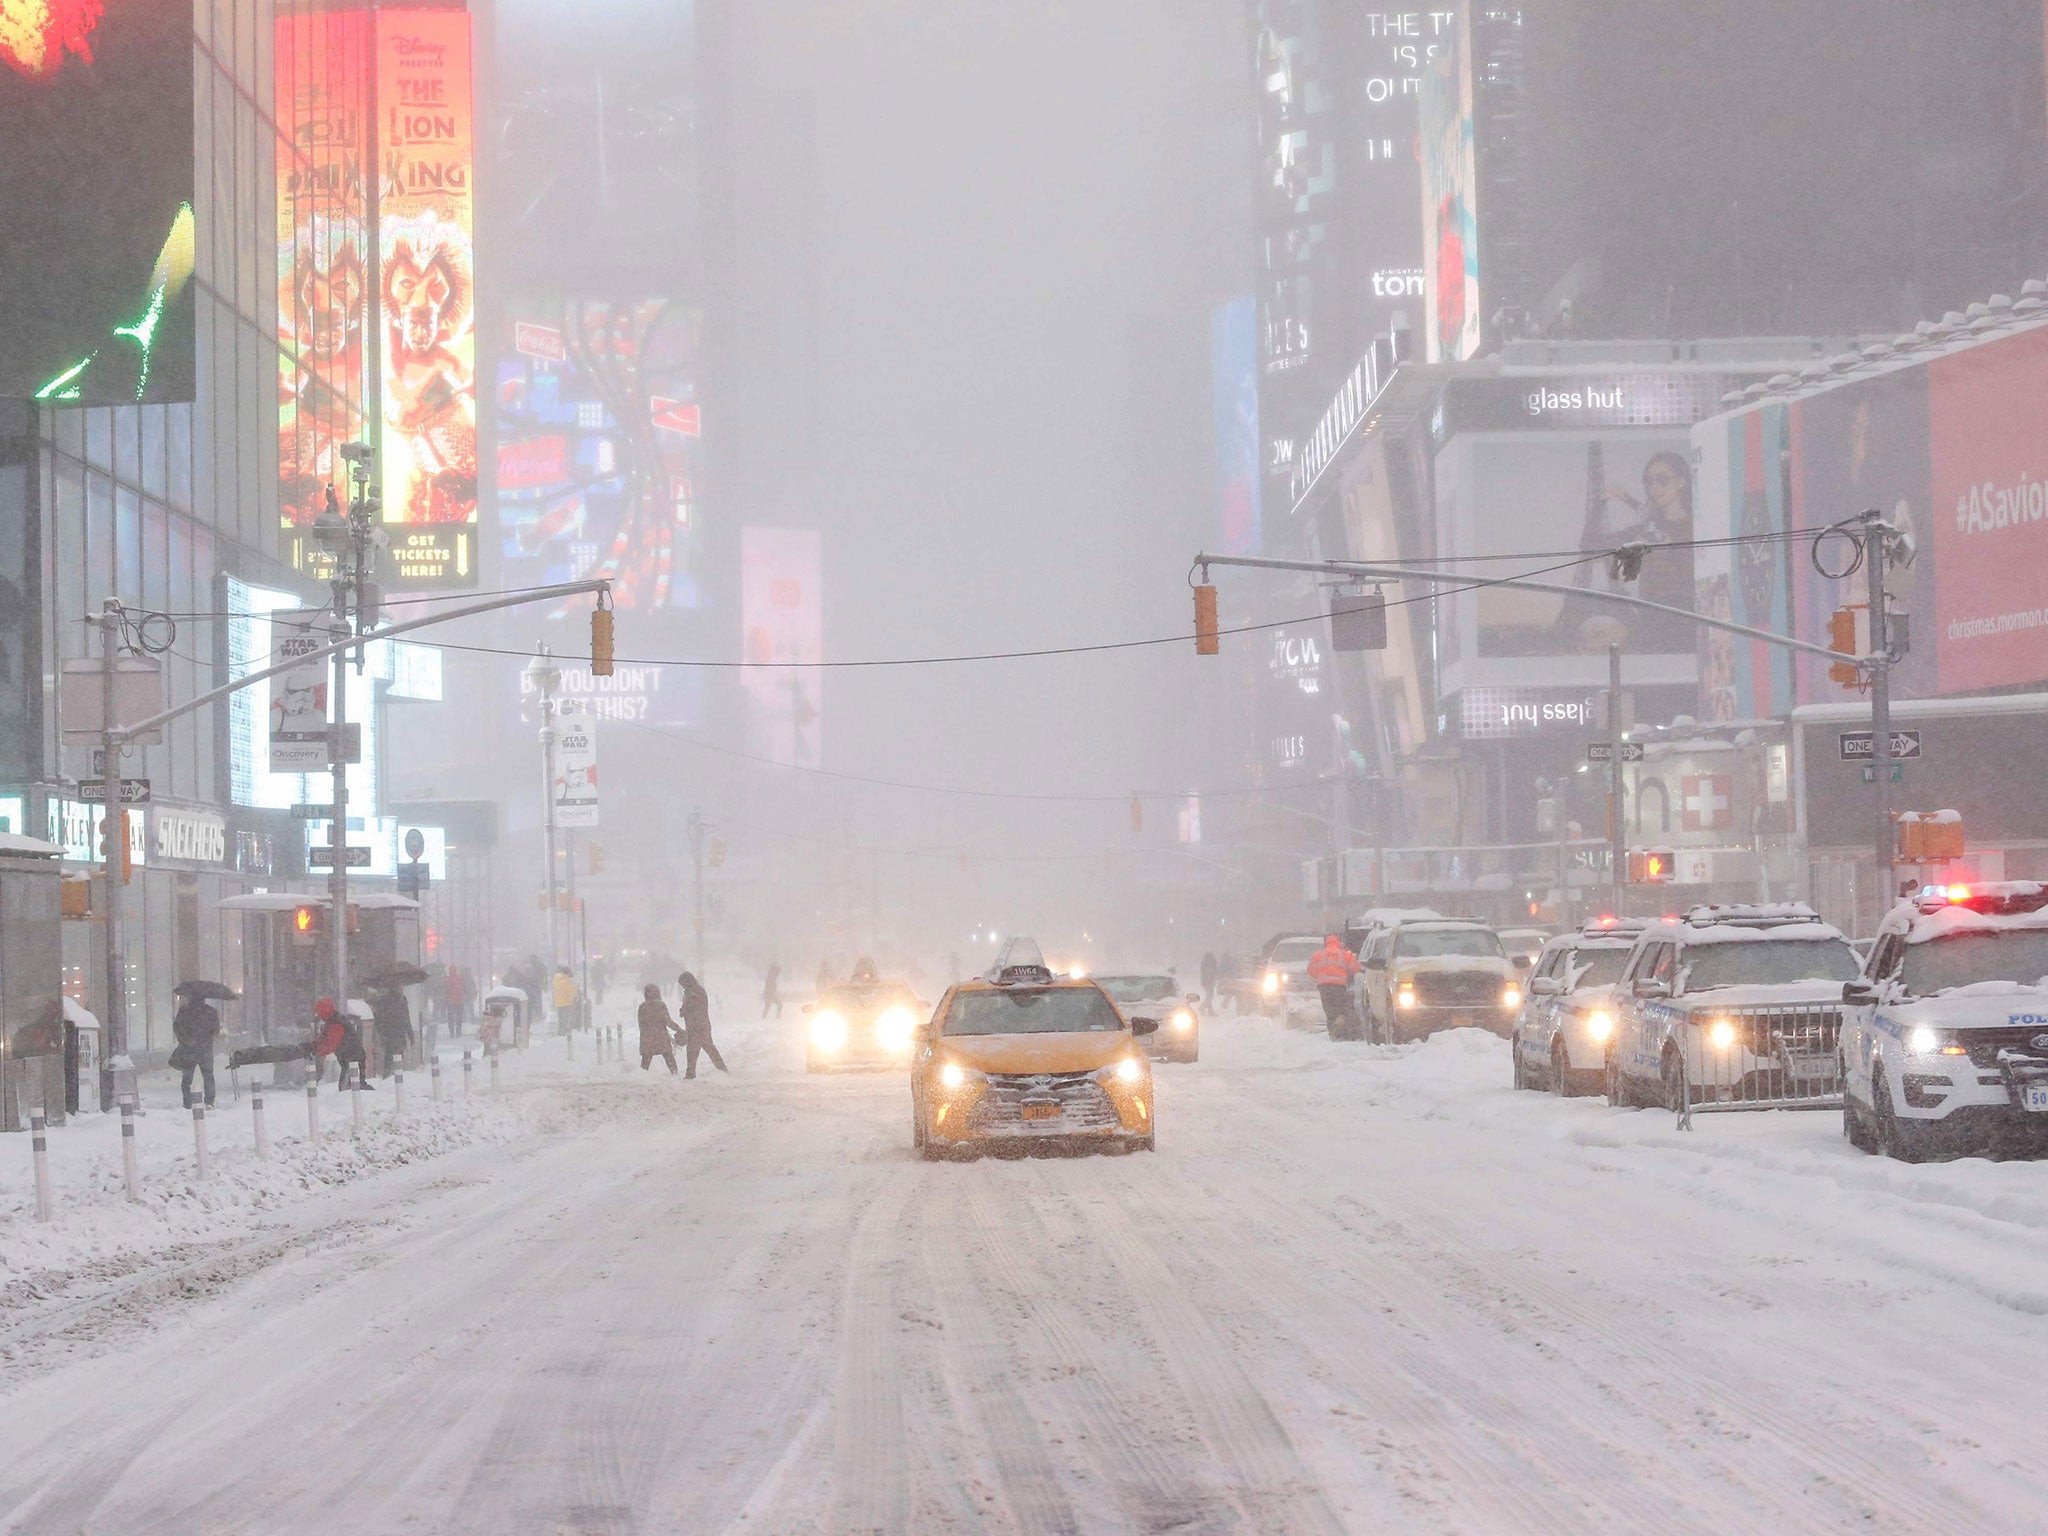 30 inches of snow is expected to fall in new York city